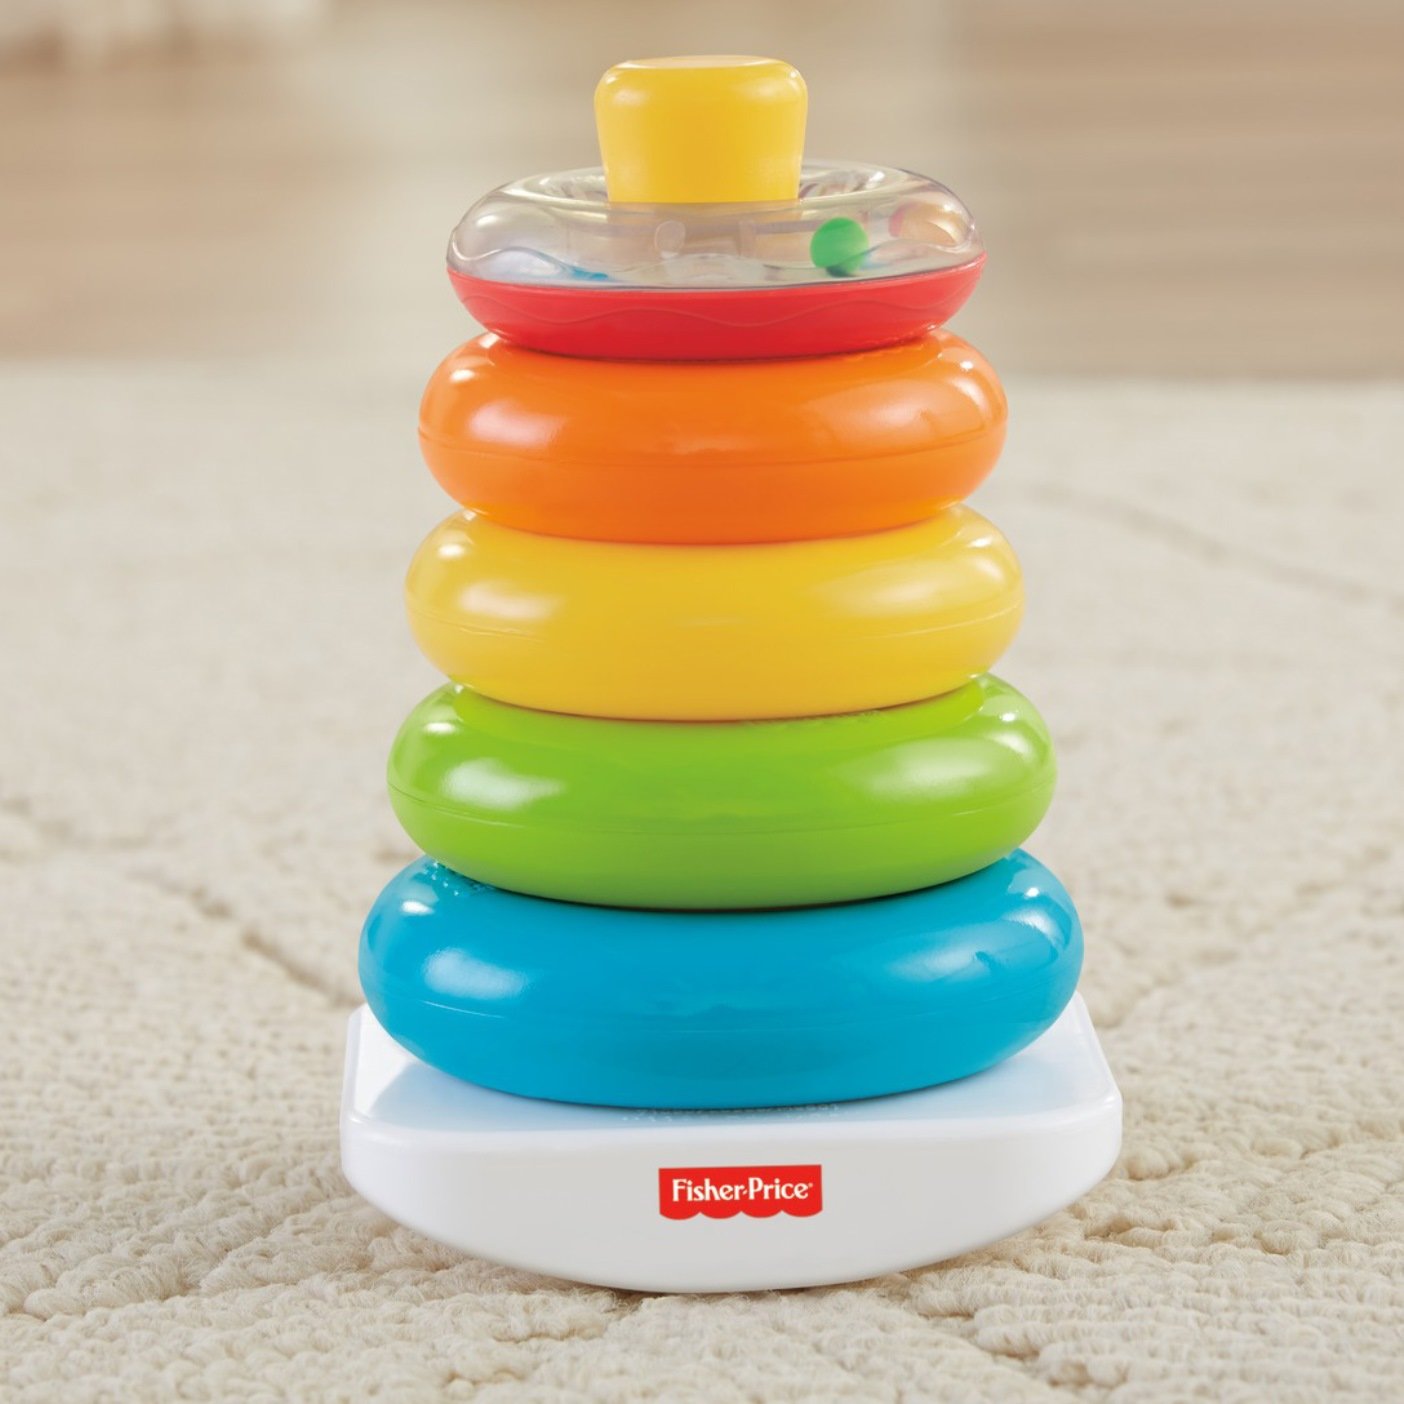 Fisher-Price Infant Gift Set with Baby’s First Blocks (10 Shapes) and Rock-a-Stack Ring Stacking Toy for Ages 6+ Months (Amazon Exclusive)